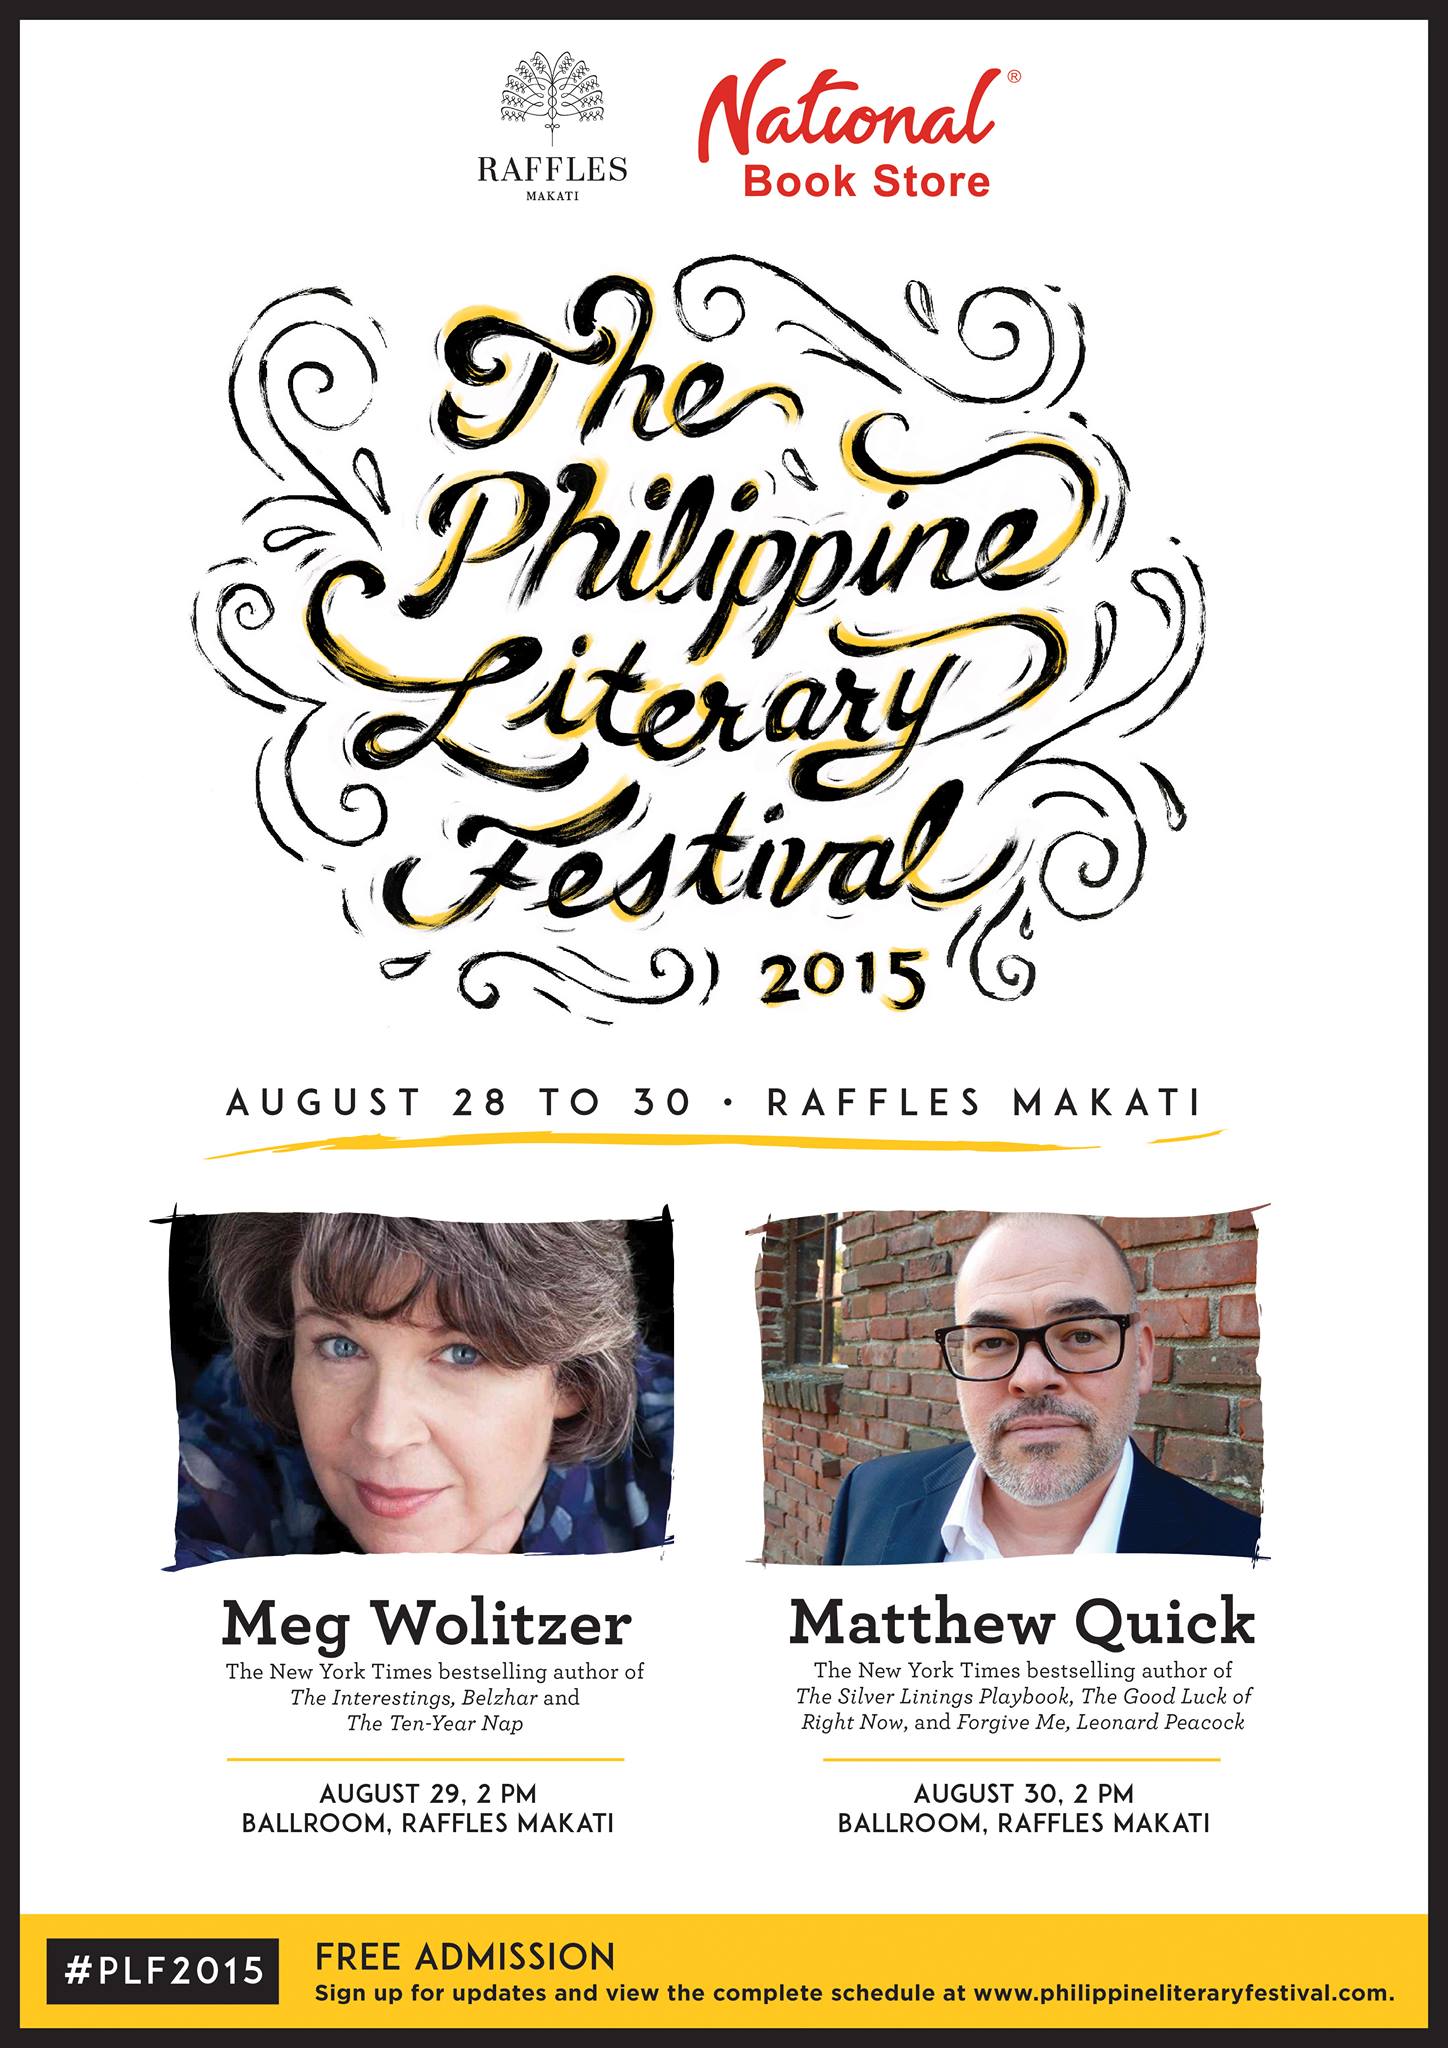 The Philippine Literary Festival     August 28 - August 30     Aug 28 at 9:00am to Aug 30 at 7:00pm     	     Show Map     Raffles Makati     1 Raffles Drive, Makati Avenue, 1224 Makati Join bestselling and award winning authors Matthew Quick and Meg Wolitzer in Raffles Makati and National Book Store’s Philippine Literary Festival from August 28 to 30, 2015 at the Raffles Makati. Admission is free! Attend three days of book signings, discussions and panels about books and literature from top Filipino writers and artists. The Meg Wolitzer talk and book signing will be on August 29 at 2 p.m. The Matthew Quick talk and book signing will be on August 30 at 2 p.m. View the complete schedule and get details of all events at philippineliteraryfestival.com. All events will be held at the Raffles Makati with registration starting at 9 a.m. everyday. Sign up for updates and view the complete schedule at philippineliteraryfestival.com. Tag #PLF2015 to join the discussion. Frequently Asked Questions When and where is The Philippine Literary Festival? The Philippine Literary Festival will be from August 28 to 30, 2015 at the Raffles Makati. When will the registration be? Daily registration starts at 9:00 a.m. and will continue throughout the day. Each guest will be asked to fill out the registration form upon arrival and will be given a festival ID/ pass which can be used for all the events in The Philippine Literary Festival from August 28 to 30. Venue capacities for each event are limited. Seats are on a first come, first served basis. Venue Capacity: Buenavista Function Room|40 people Namayan Function Room|60 people Ballroom 1|280 people Ballroom 2|500 people Is there a registration fee? No. There is no registration fee. Admission is FREE. For local author events: How many and which books can I have signed? Is there a limit as to how many people can have their books signed? You may have any number of books signed as long as they were purchased from National Book